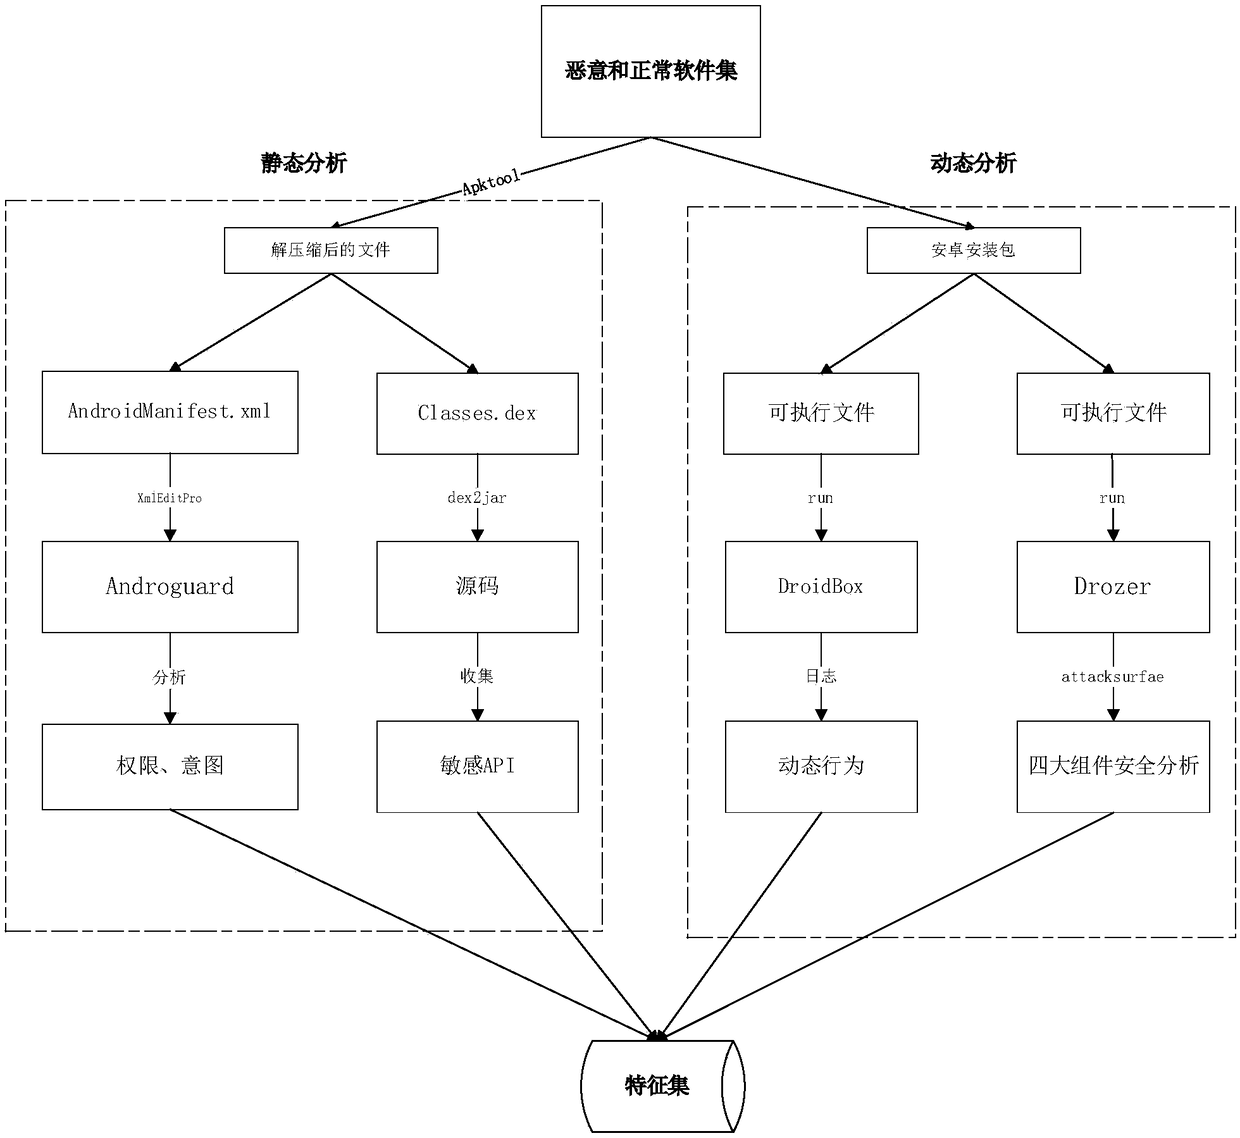 A large-scale Android malware automatic detection system and method